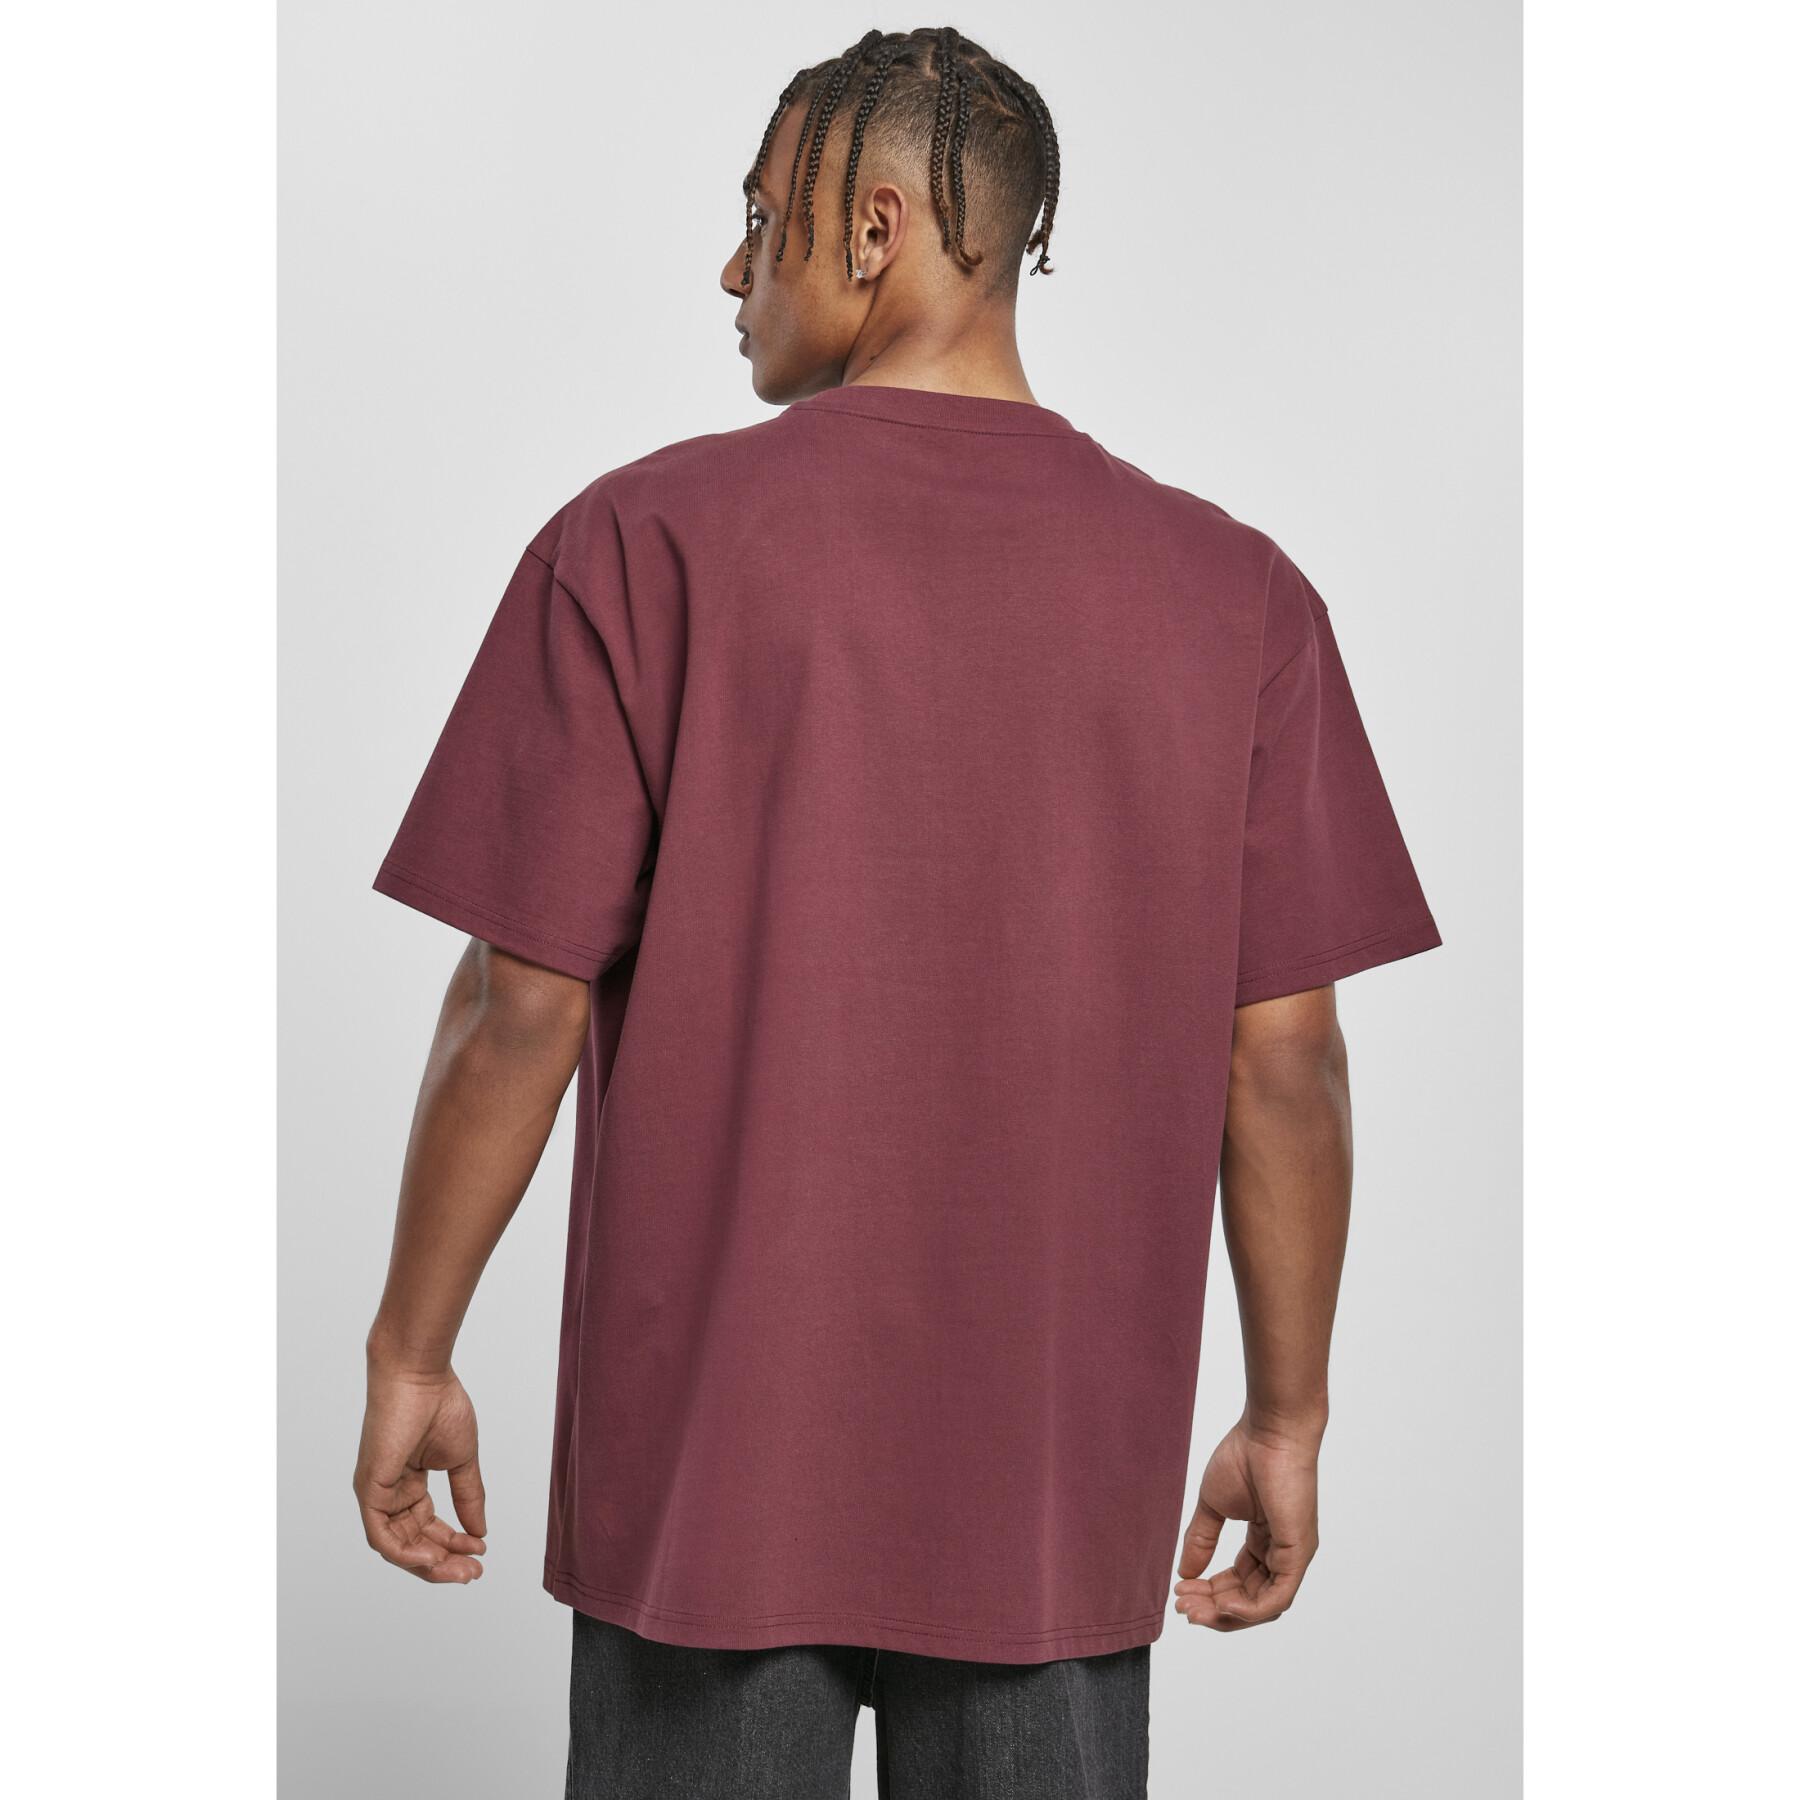 T-shirt Urban Classics heavy oversized-grandes tailles